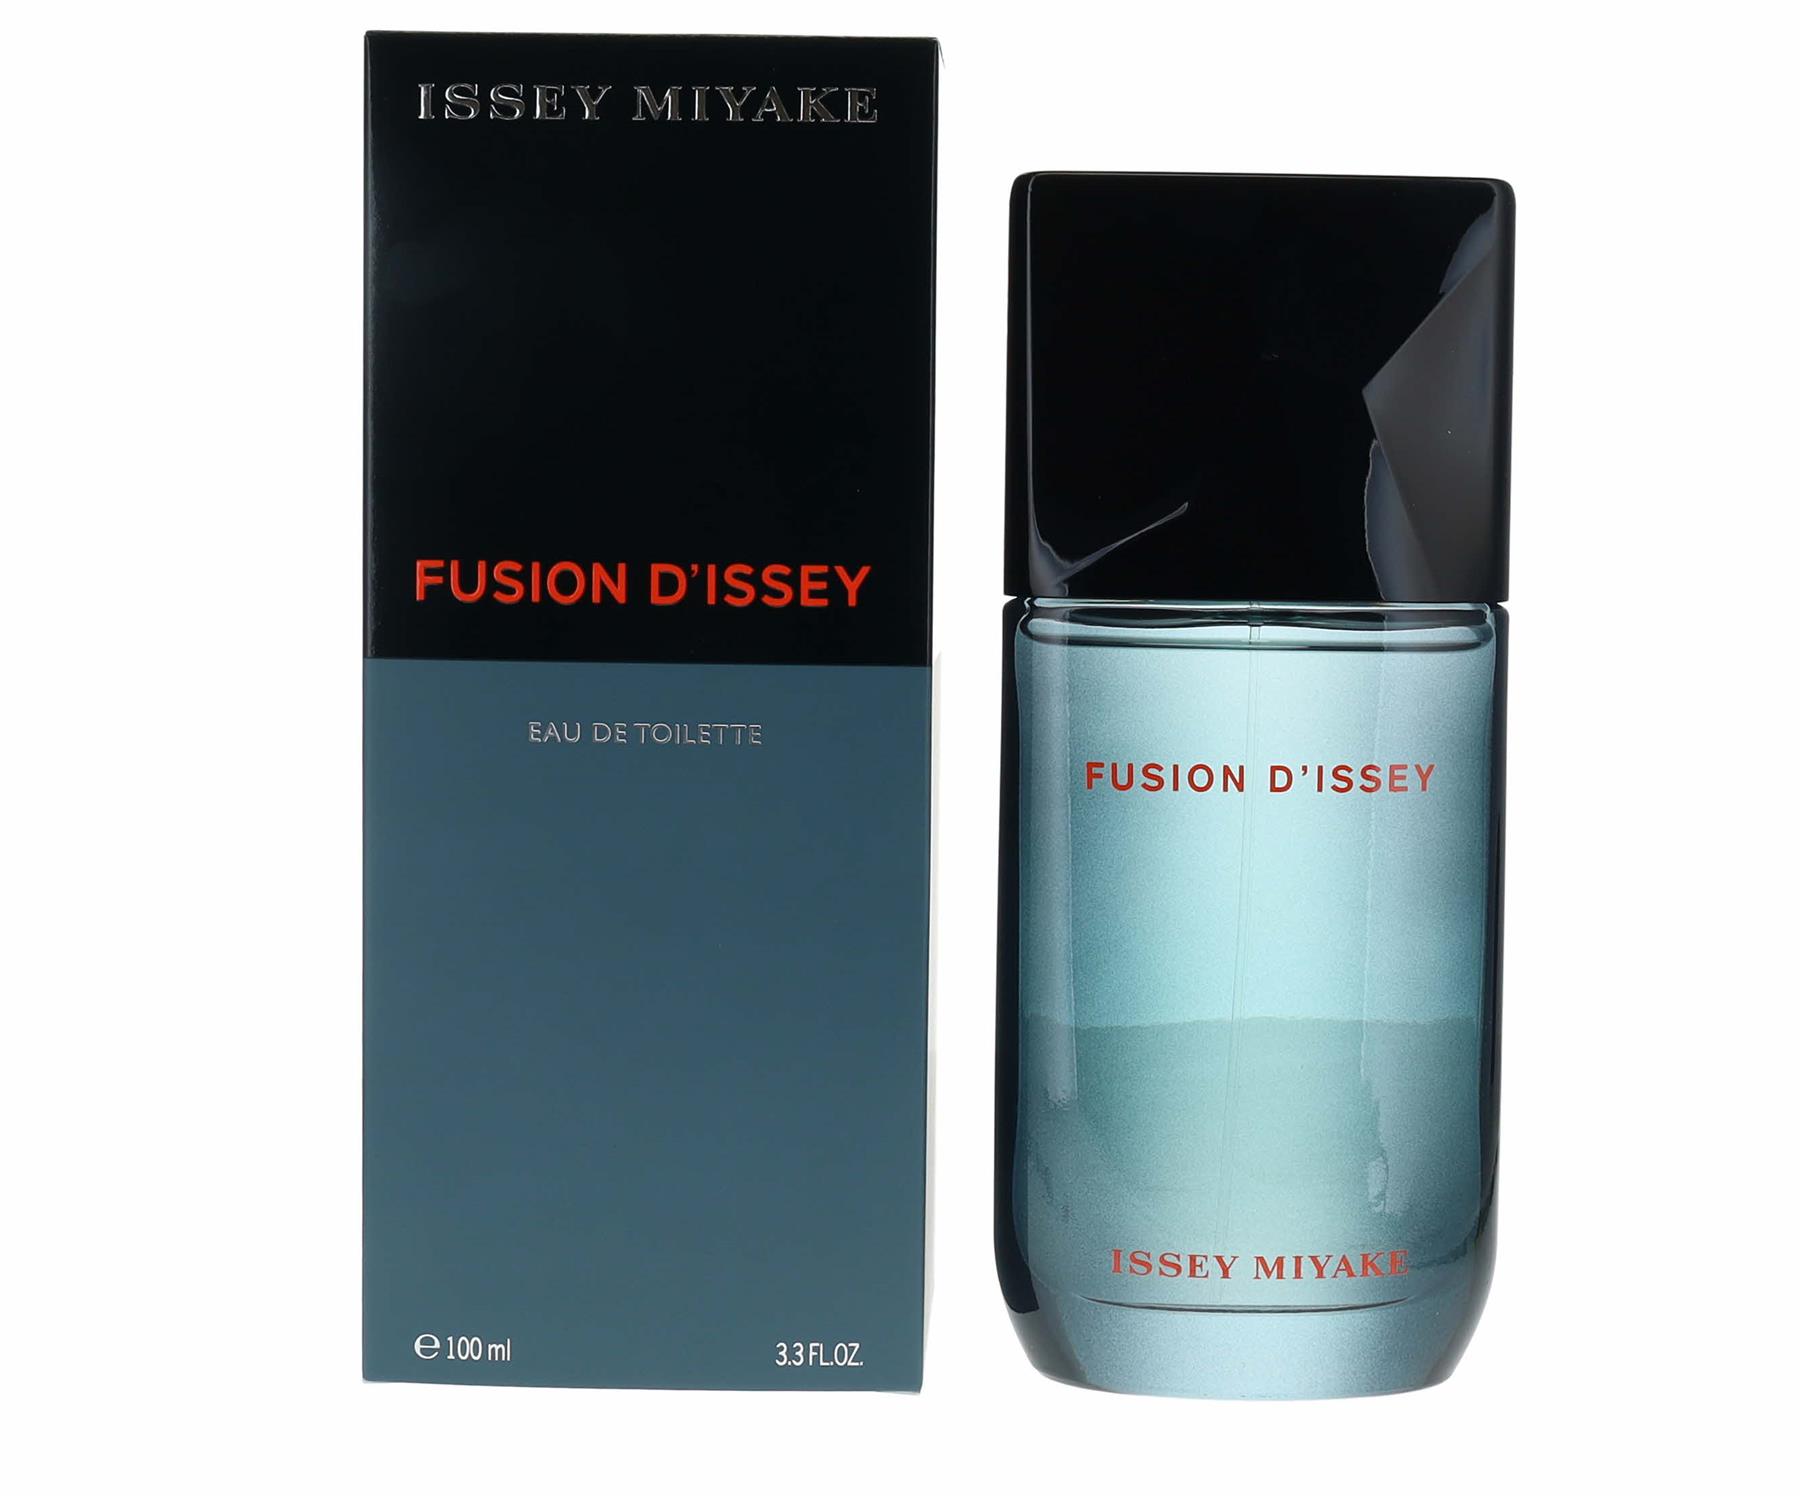 Issey Miyake Fusion d'Issey 100ml Eau de Toilette Spray for Him from Perfume Plus Direct